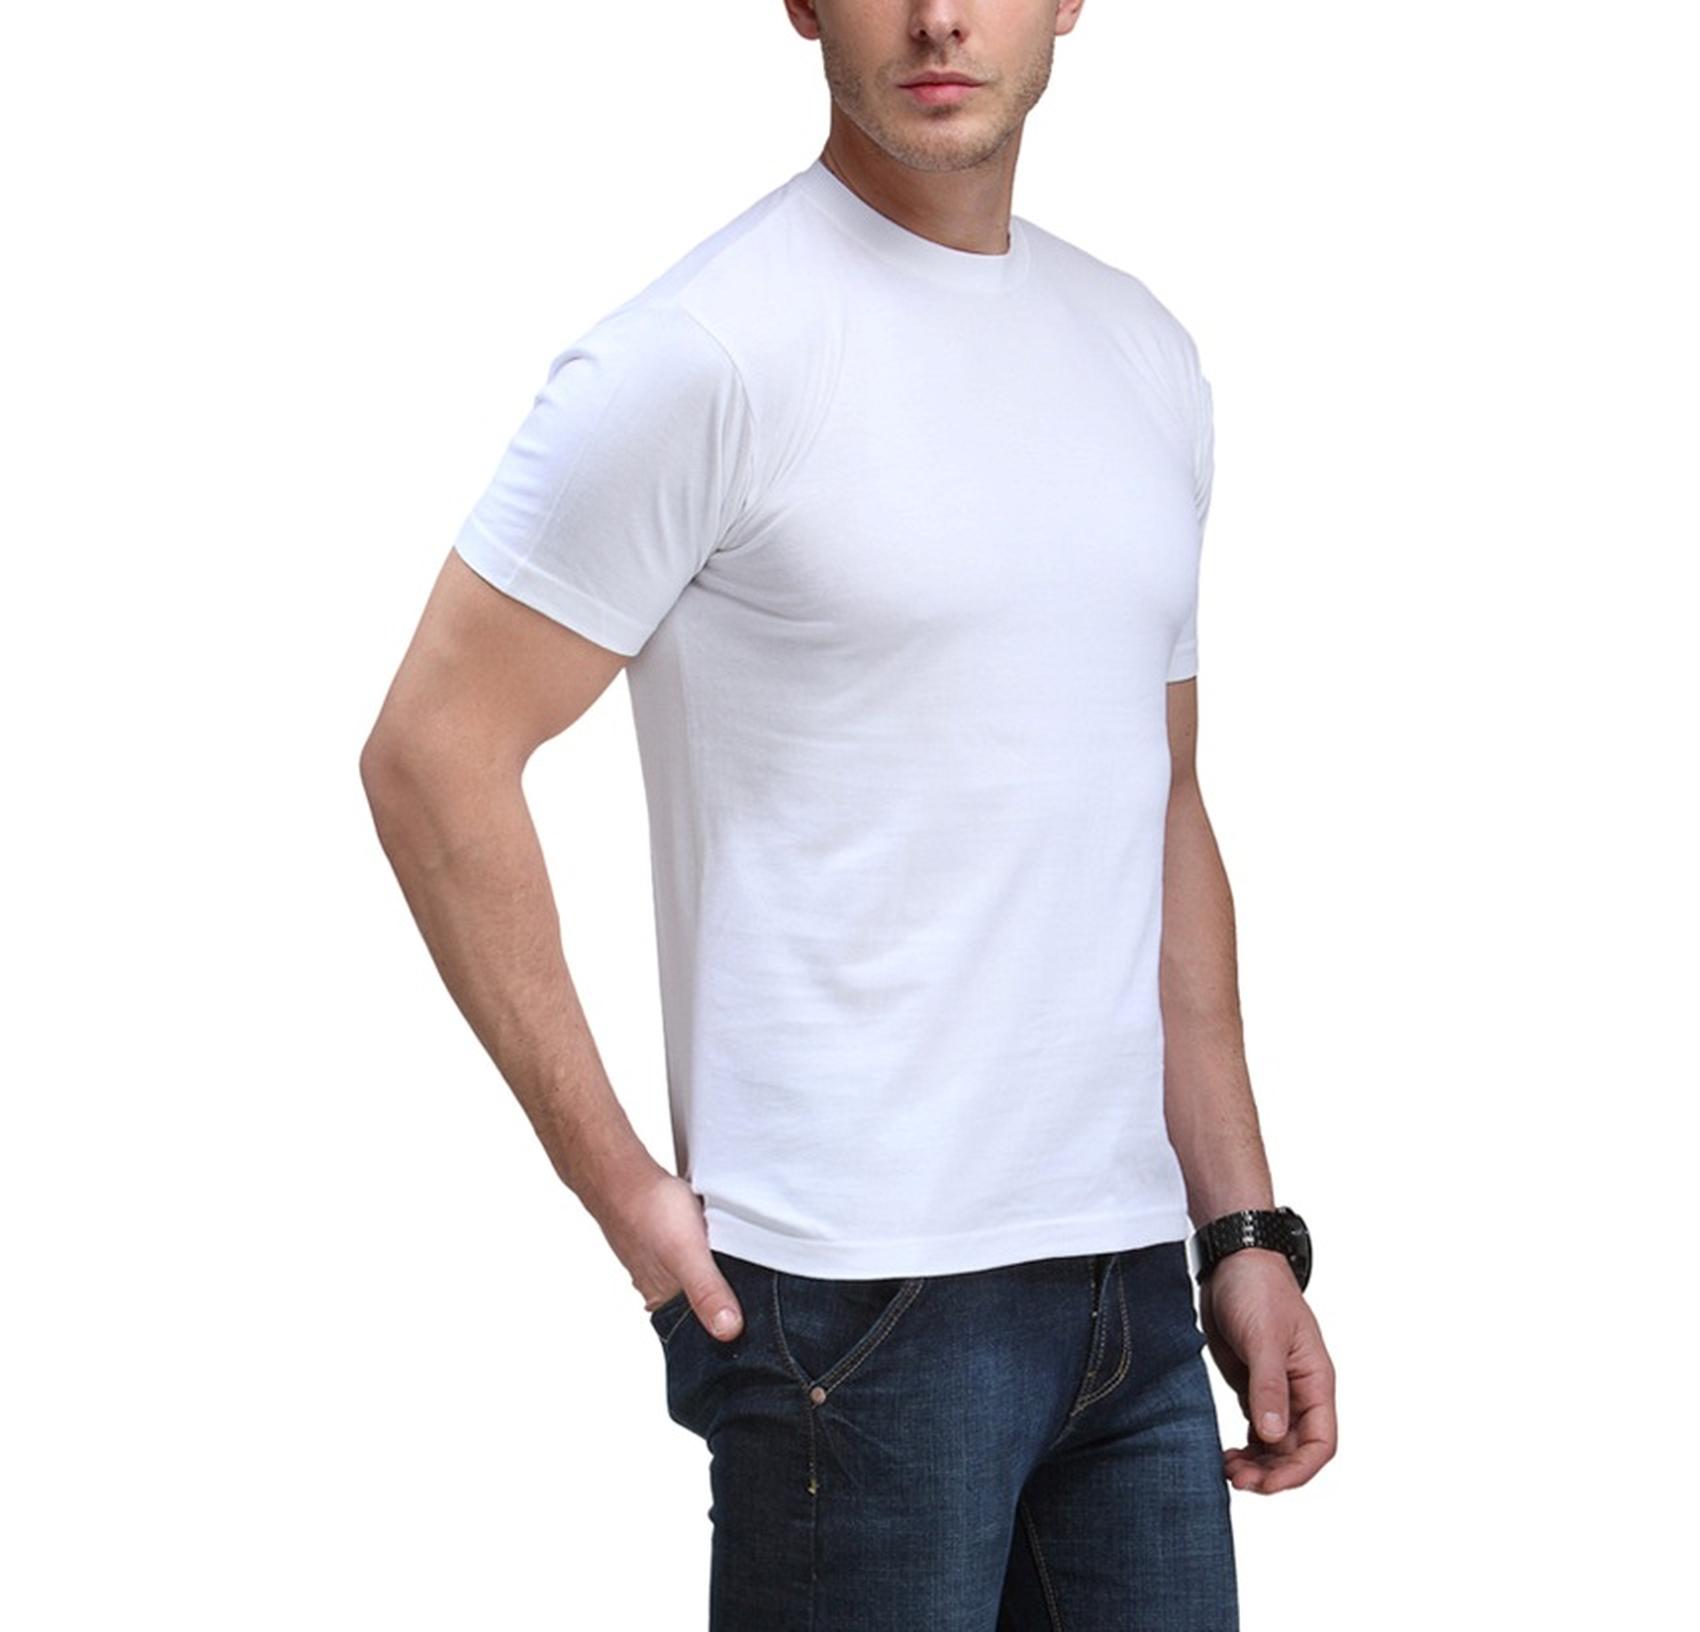 Buy Swami Samarth White Polyester T-Shirt Online @ ₹299 from ShopClues